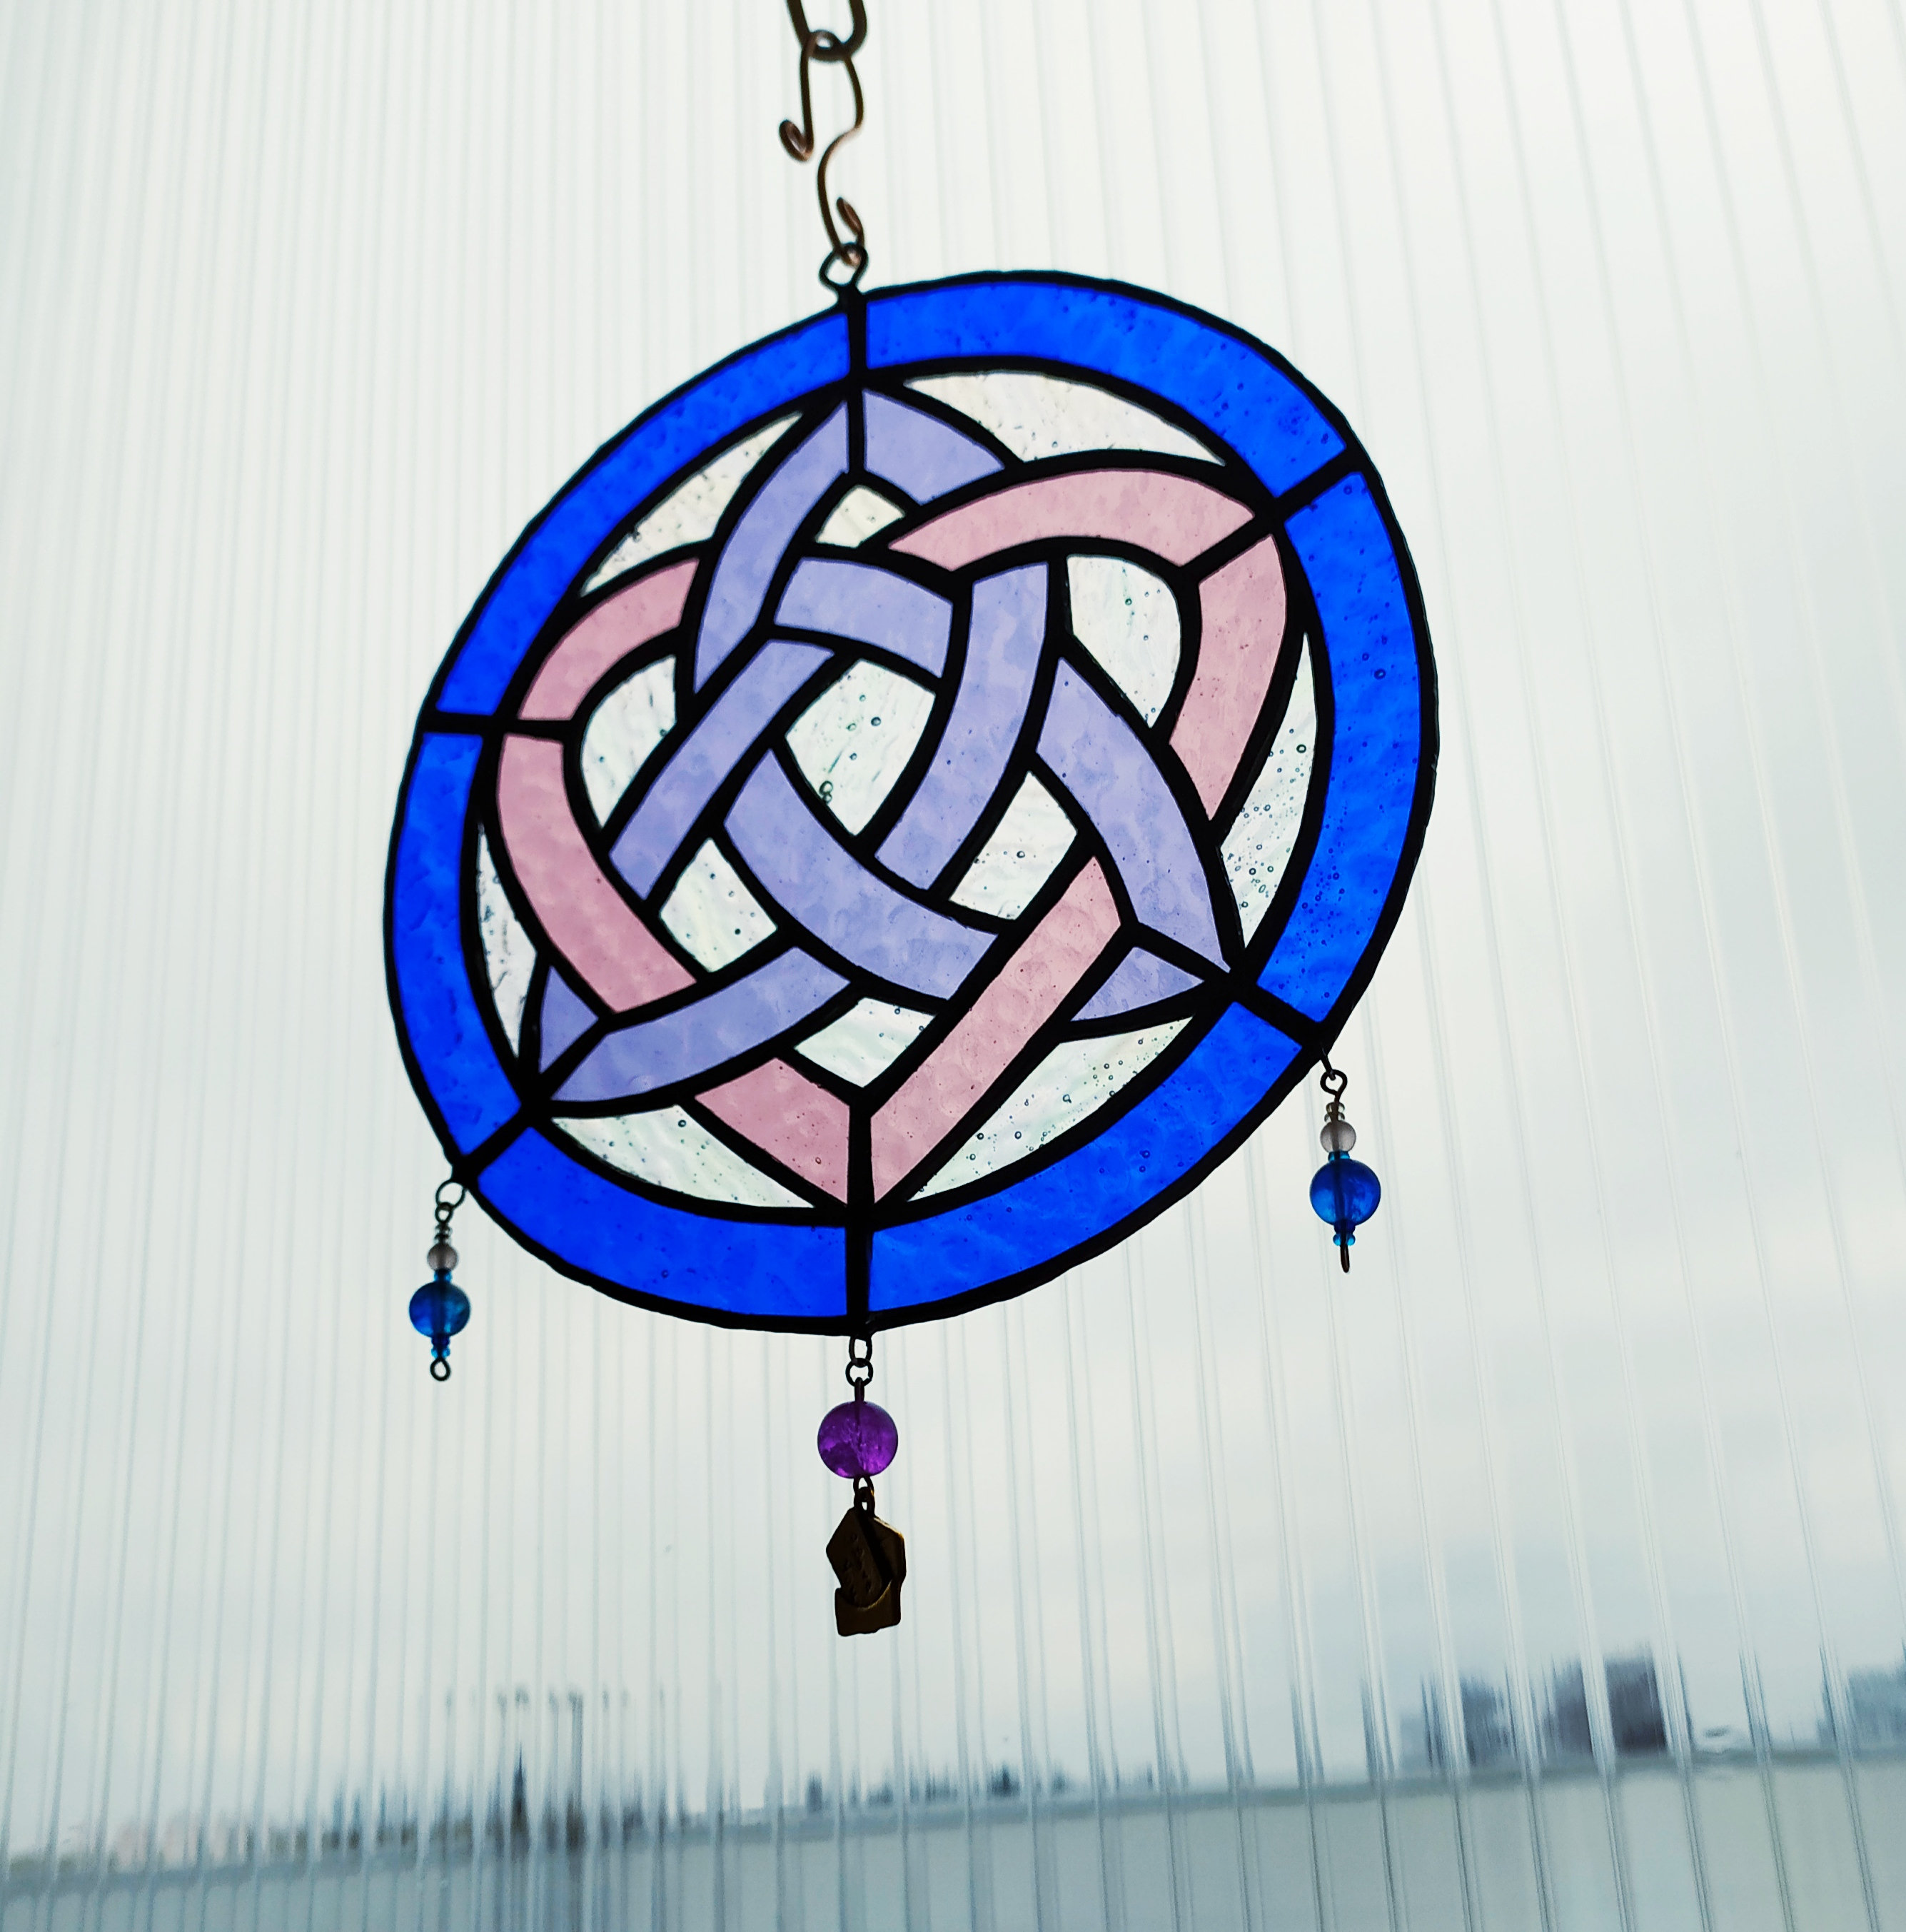 Tiffany Stained Glass Clematis Earrings — The Heritage Society